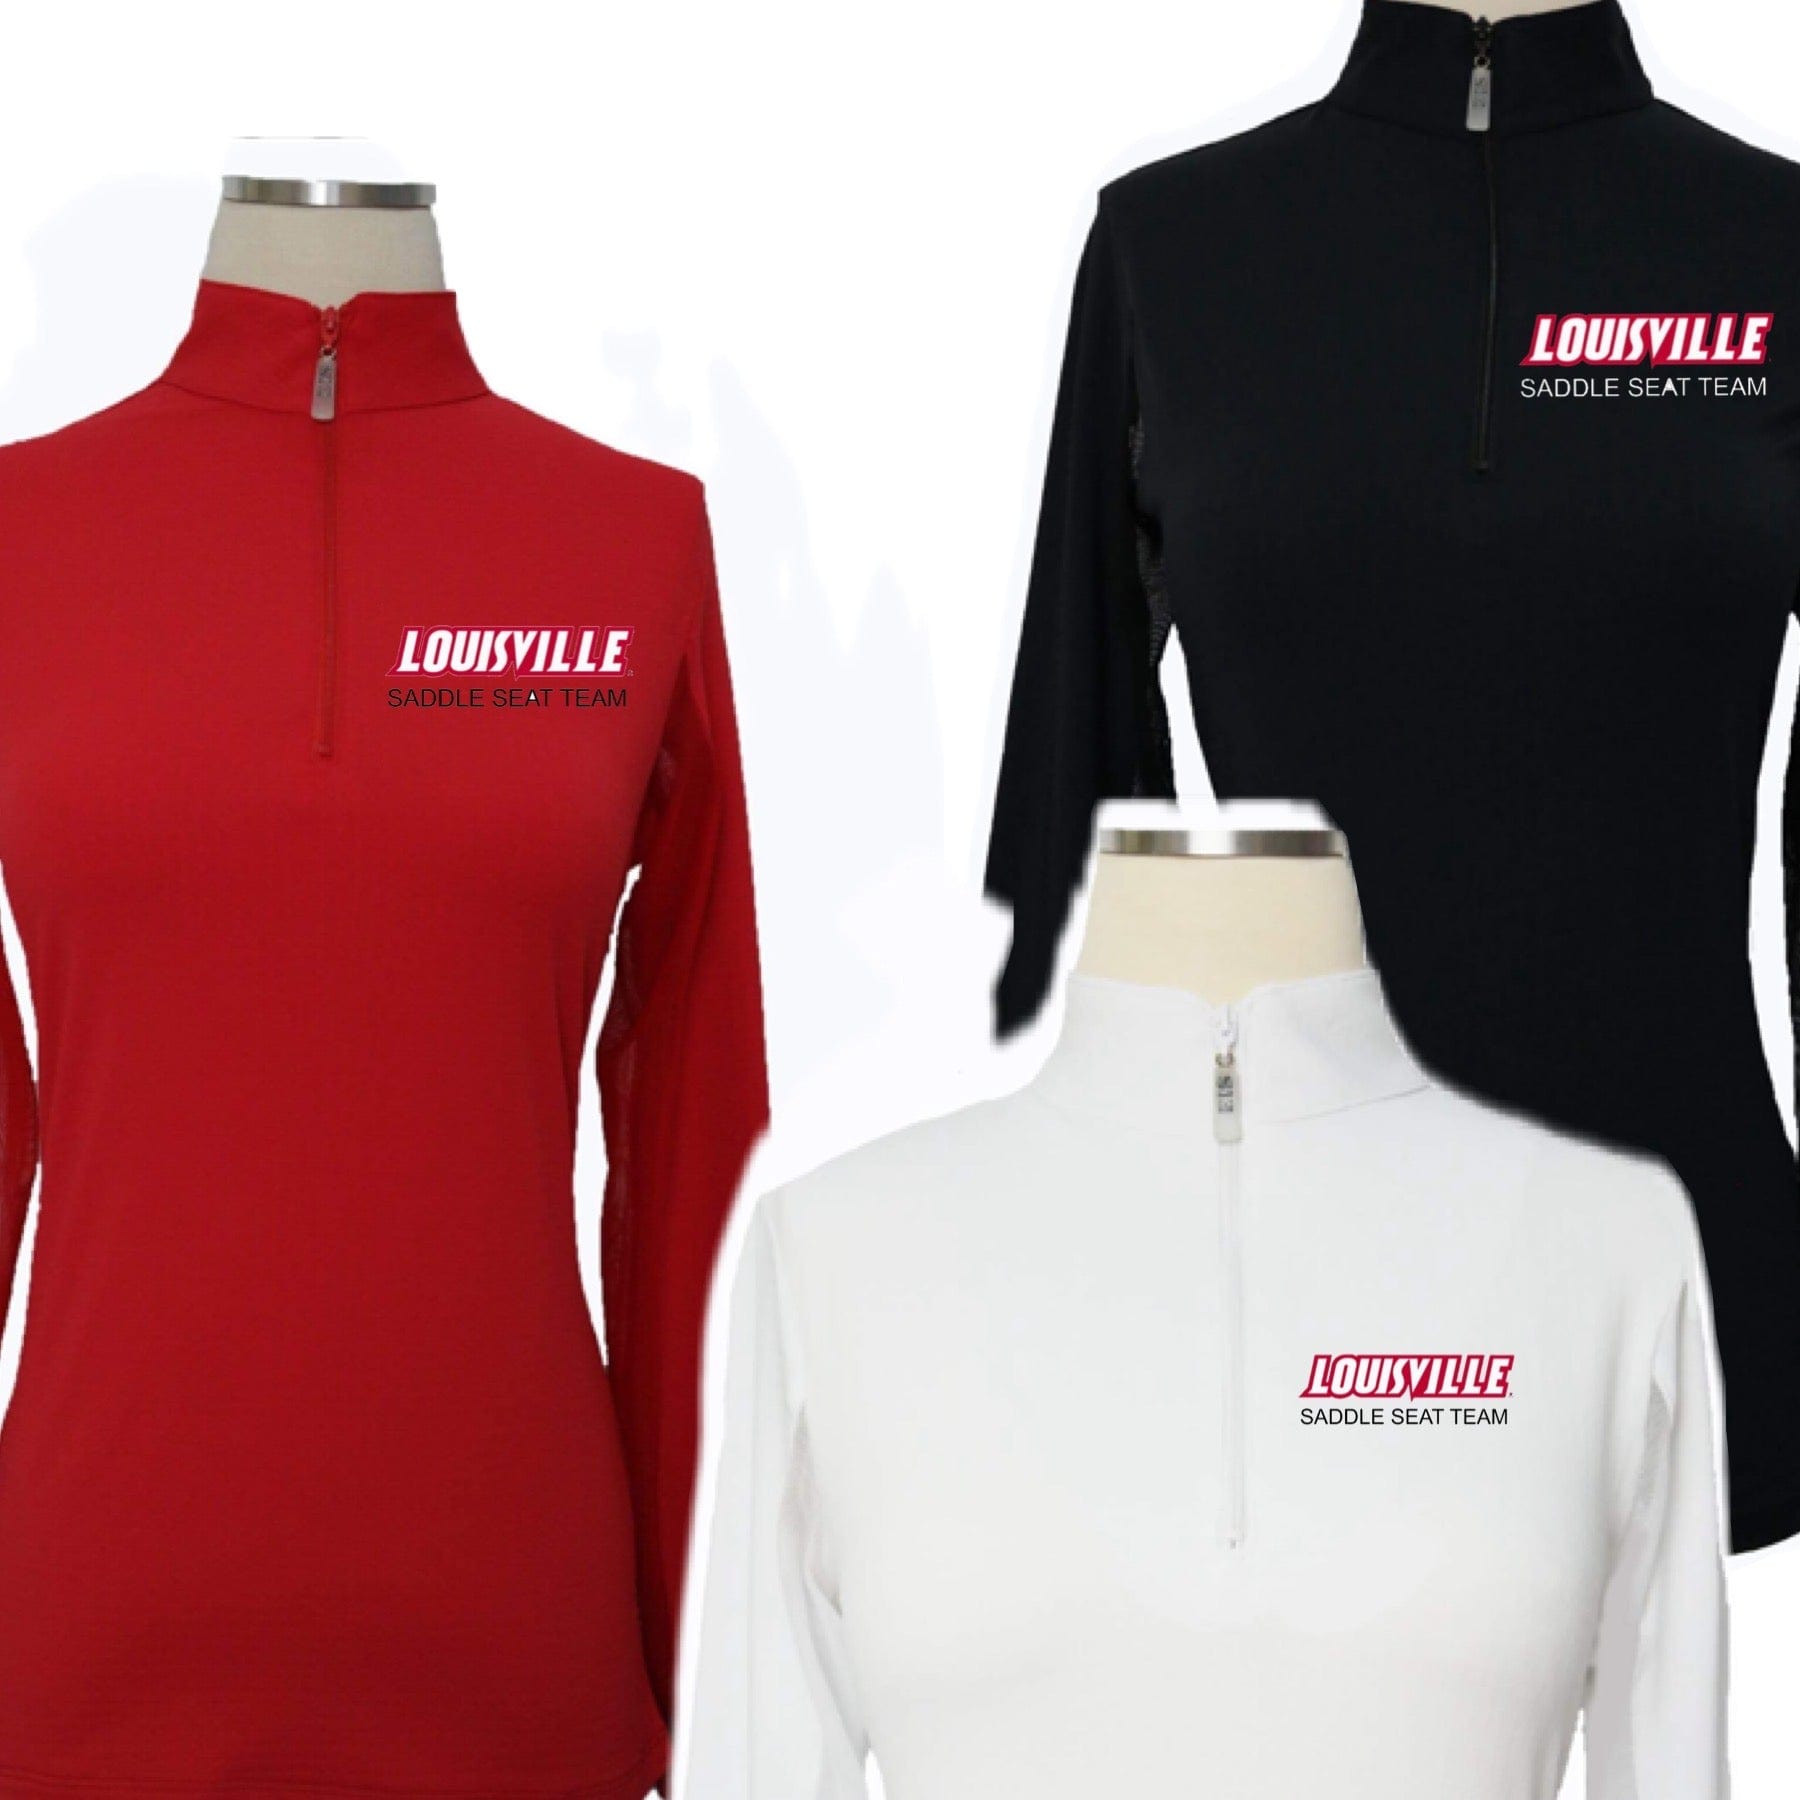 Equestrian Team Apparel Louisville Equestrian Team Saddle Seat Sun Shirt equestrian team apparel online tack store mobile tack store custom farm apparel custom show stable clothing equestrian lifestyle horse show clothing riding clothes horses equestrian tack store